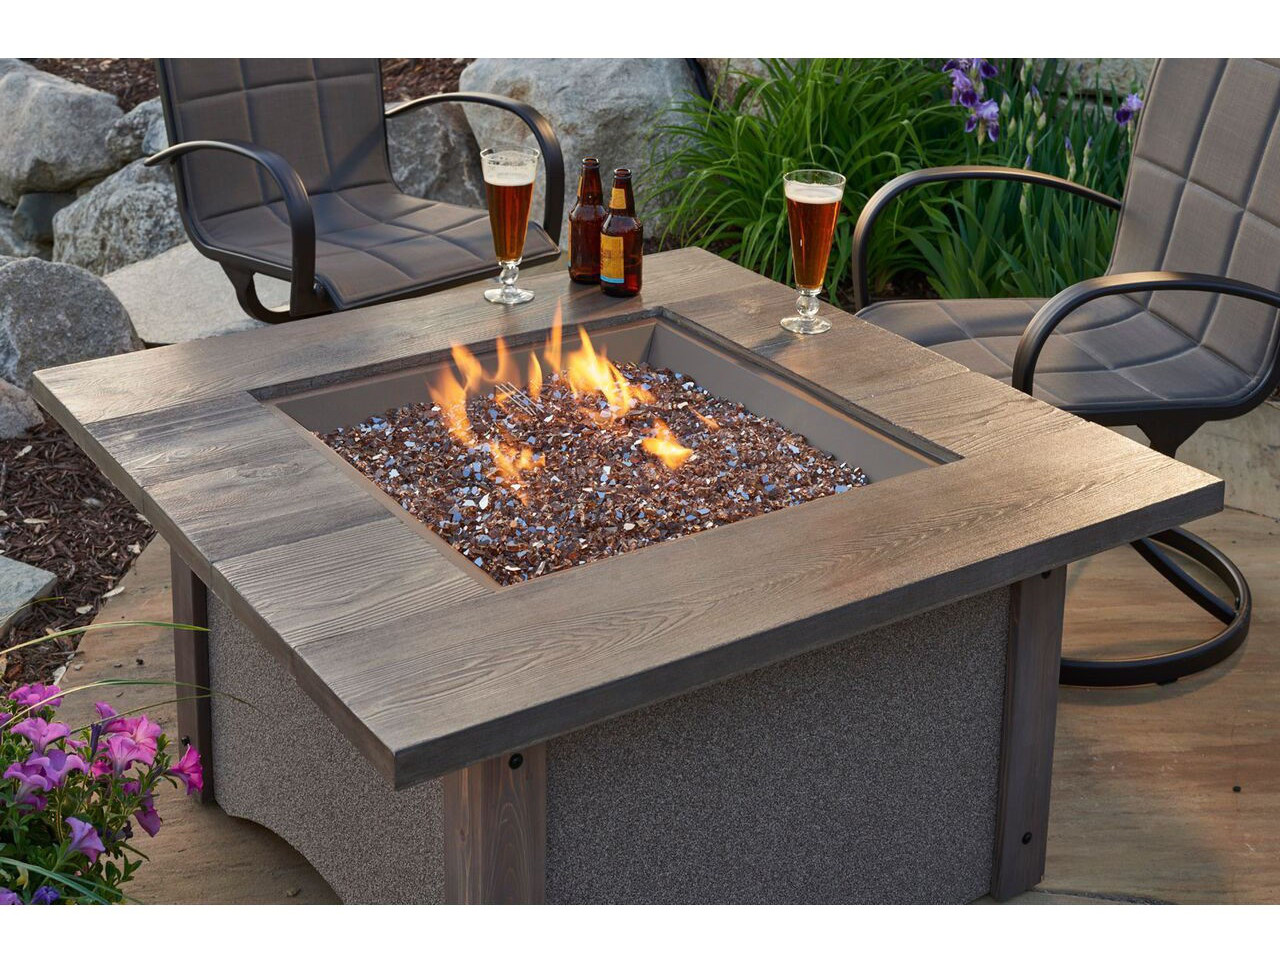 Deck Fire Pit Table
 Outdoor GreatRoom Pine Ridge Square Fire Pit Table with